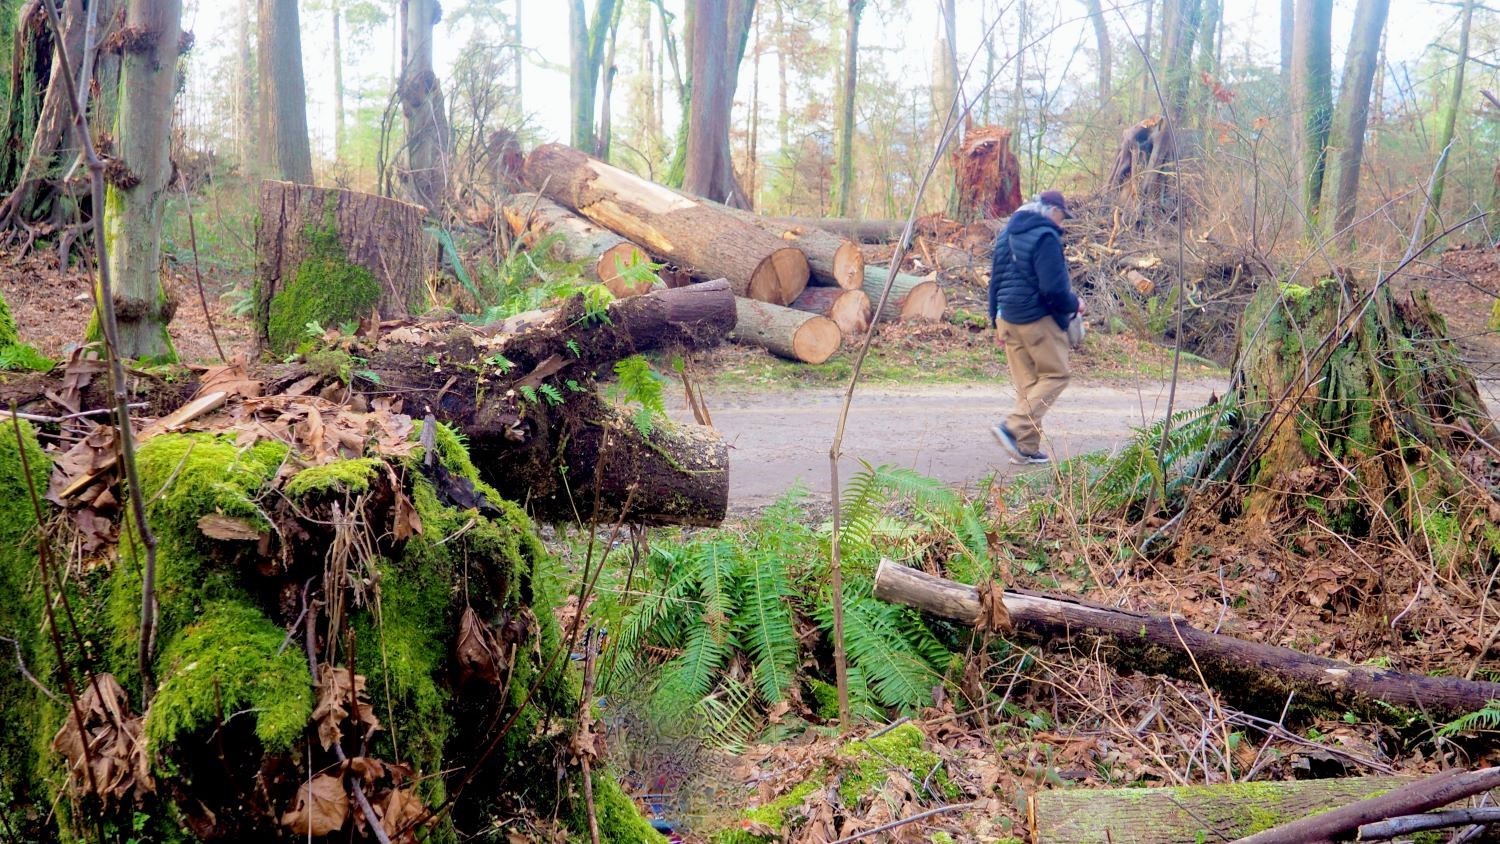 A hunched over walker makes his way through a landscape of tree stumps and pieces of sawed trees.